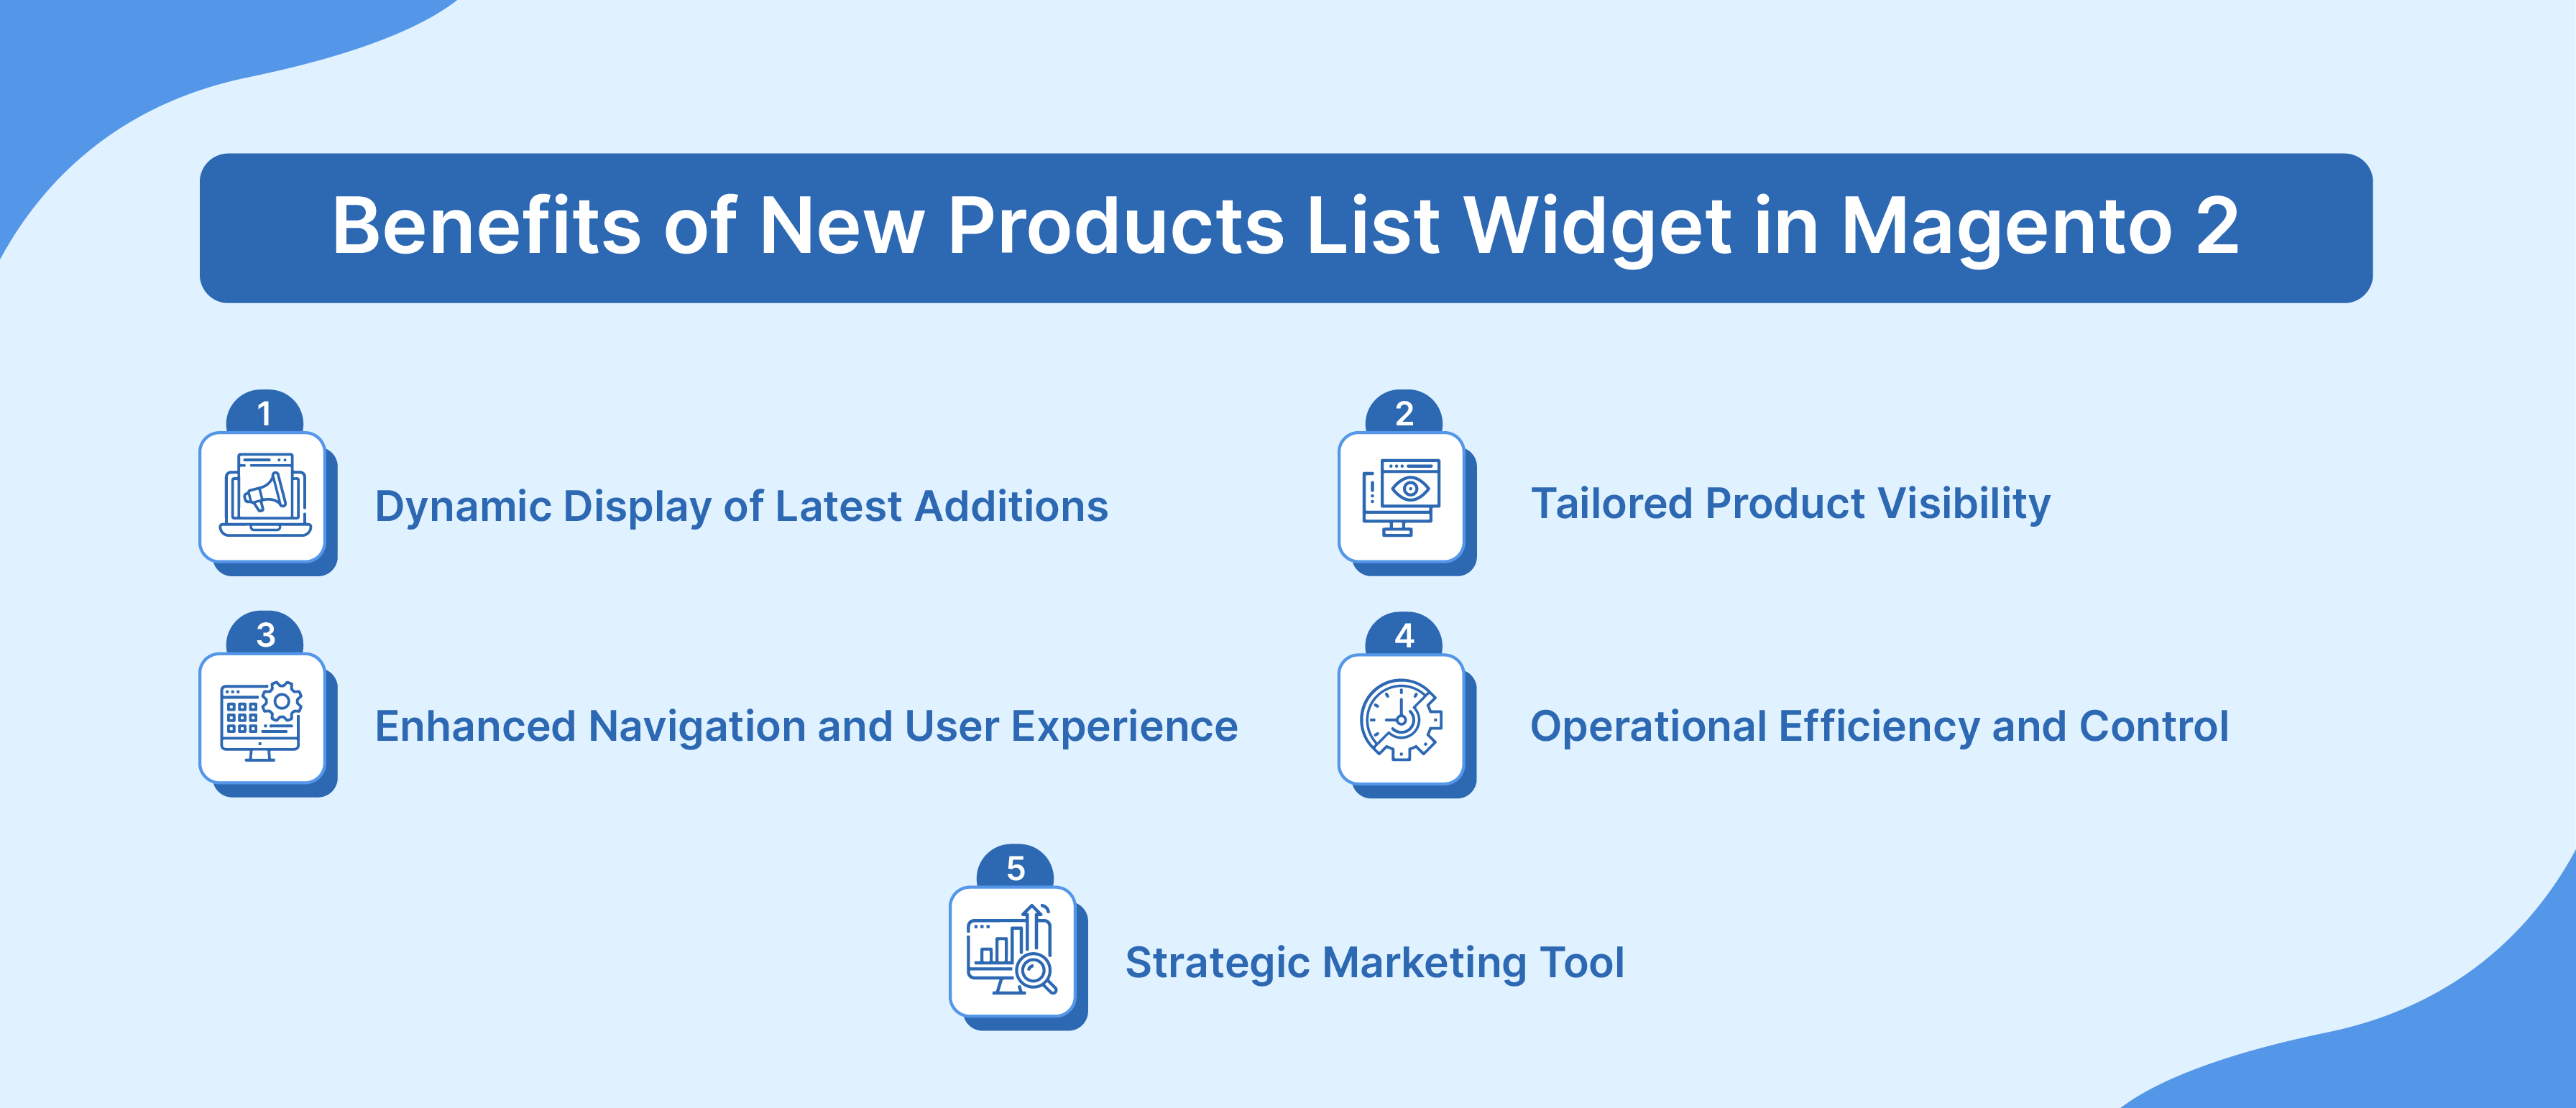 Key benefits of implementing the New Products List Widget in Magento 2 for eCommerce success